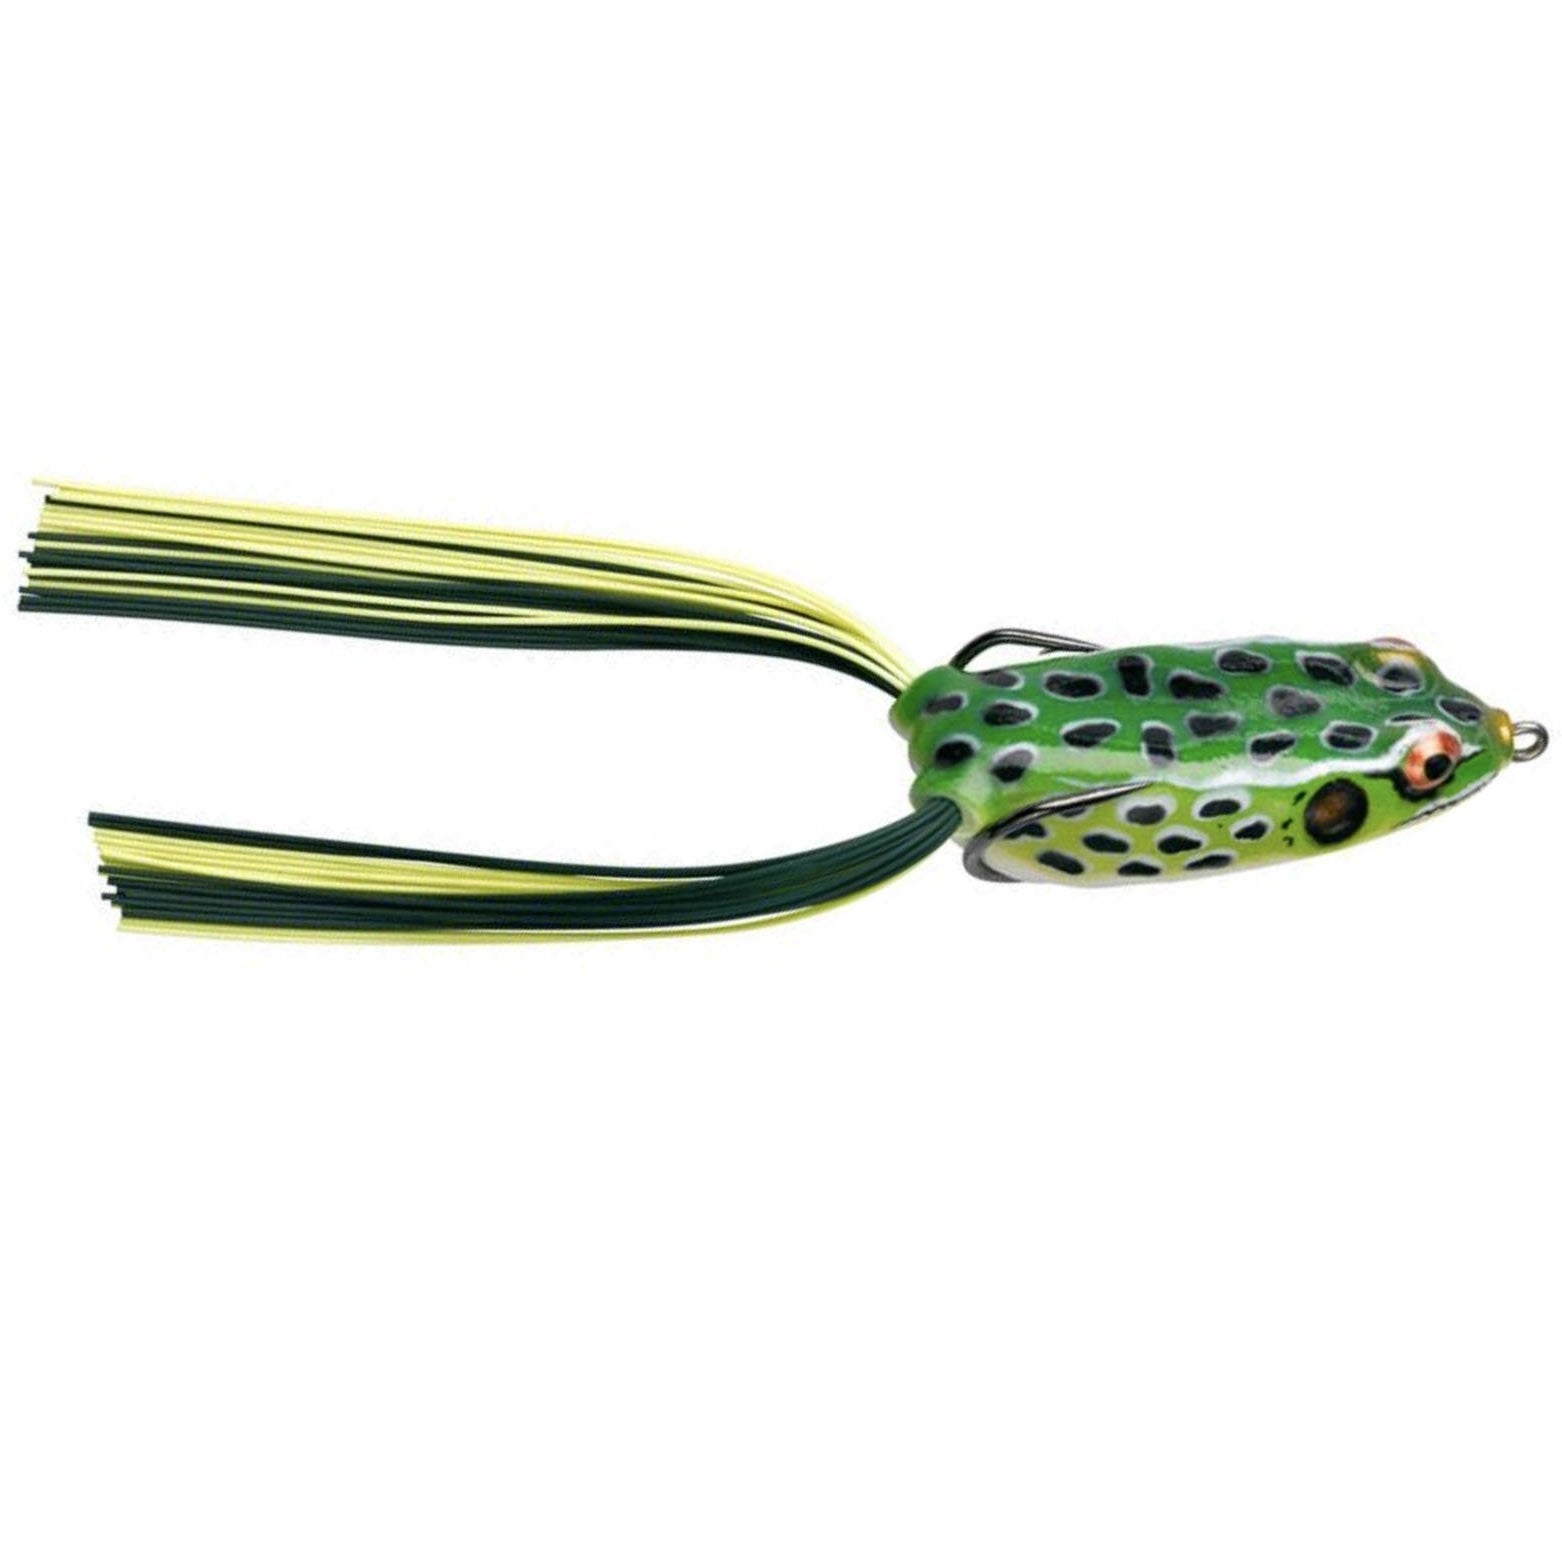 BYPC3 Booyah 2.5 Pad Crasher Albino Frog Fishing Lure for sale online